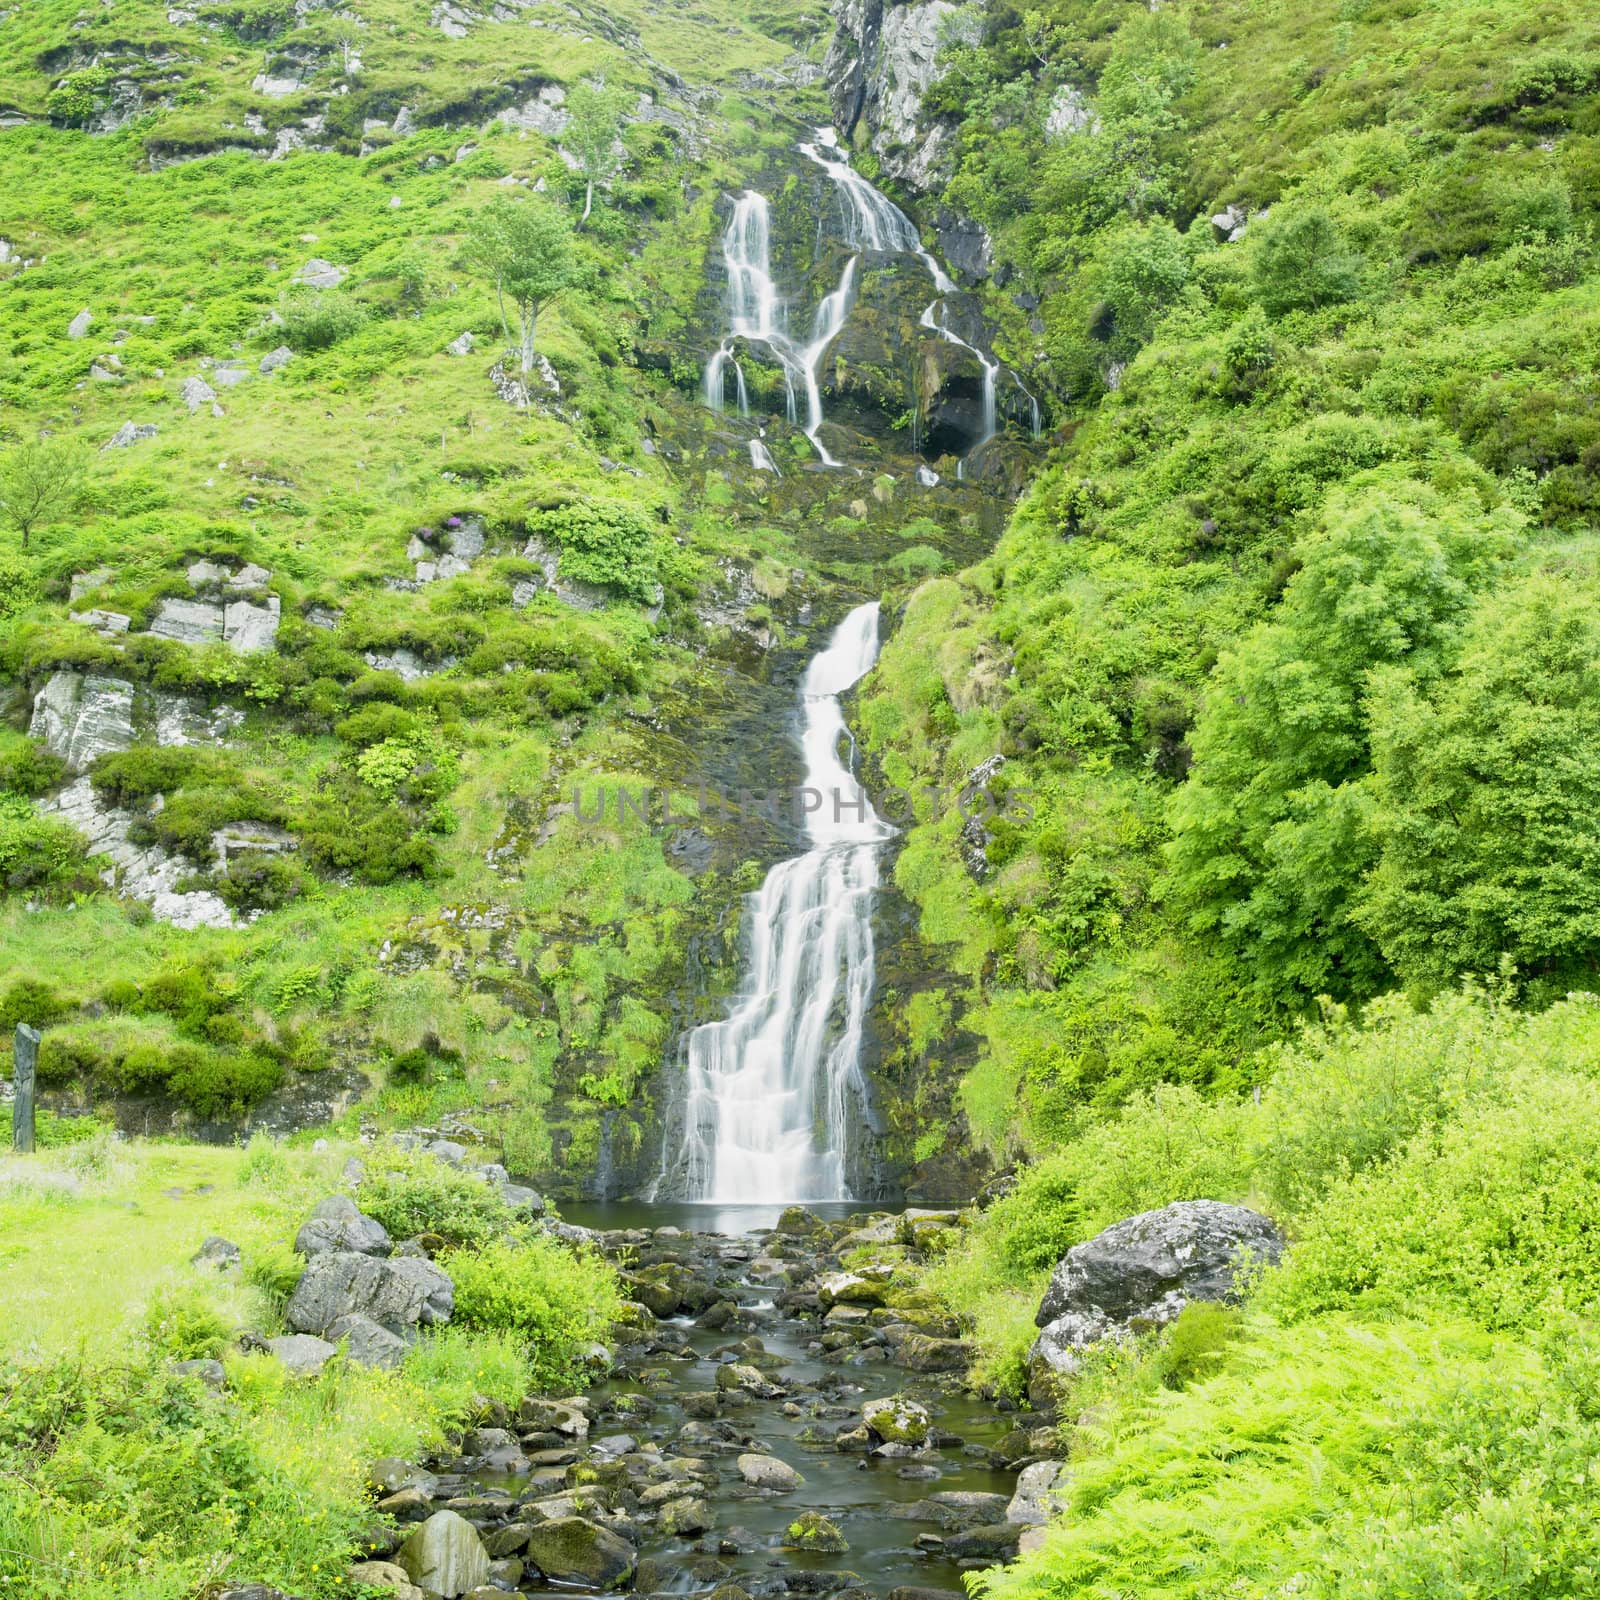 Assarancagh Waterfall, County Donegal, Ireland by phbcz